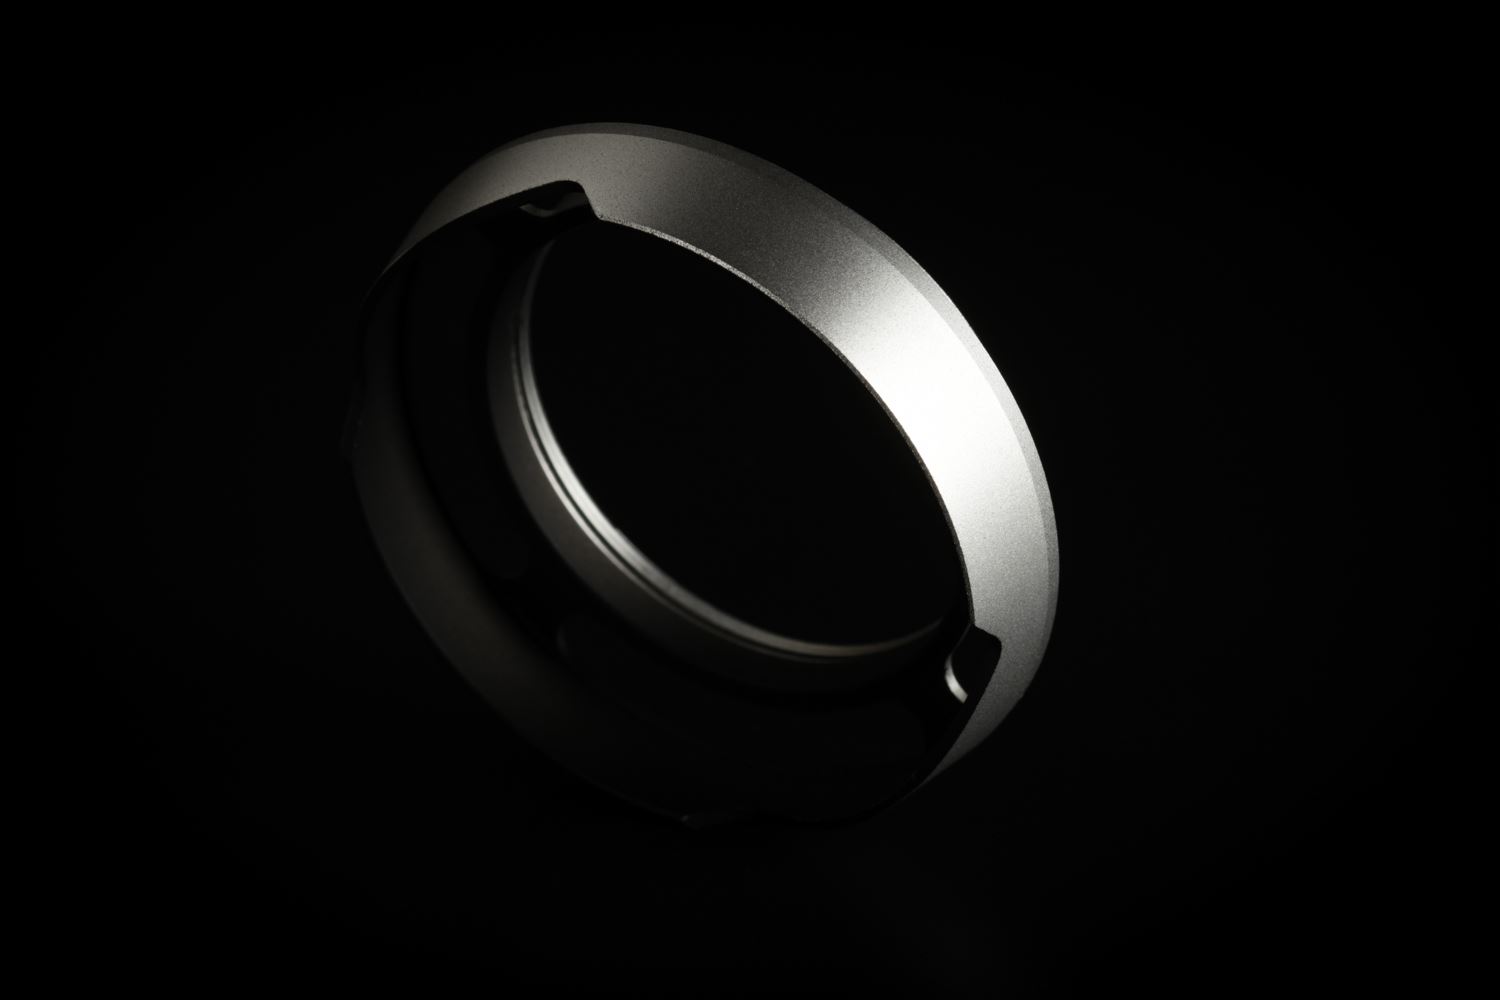 Picture of Silver Ventilated Lens Hood made for Leica E46 lenses